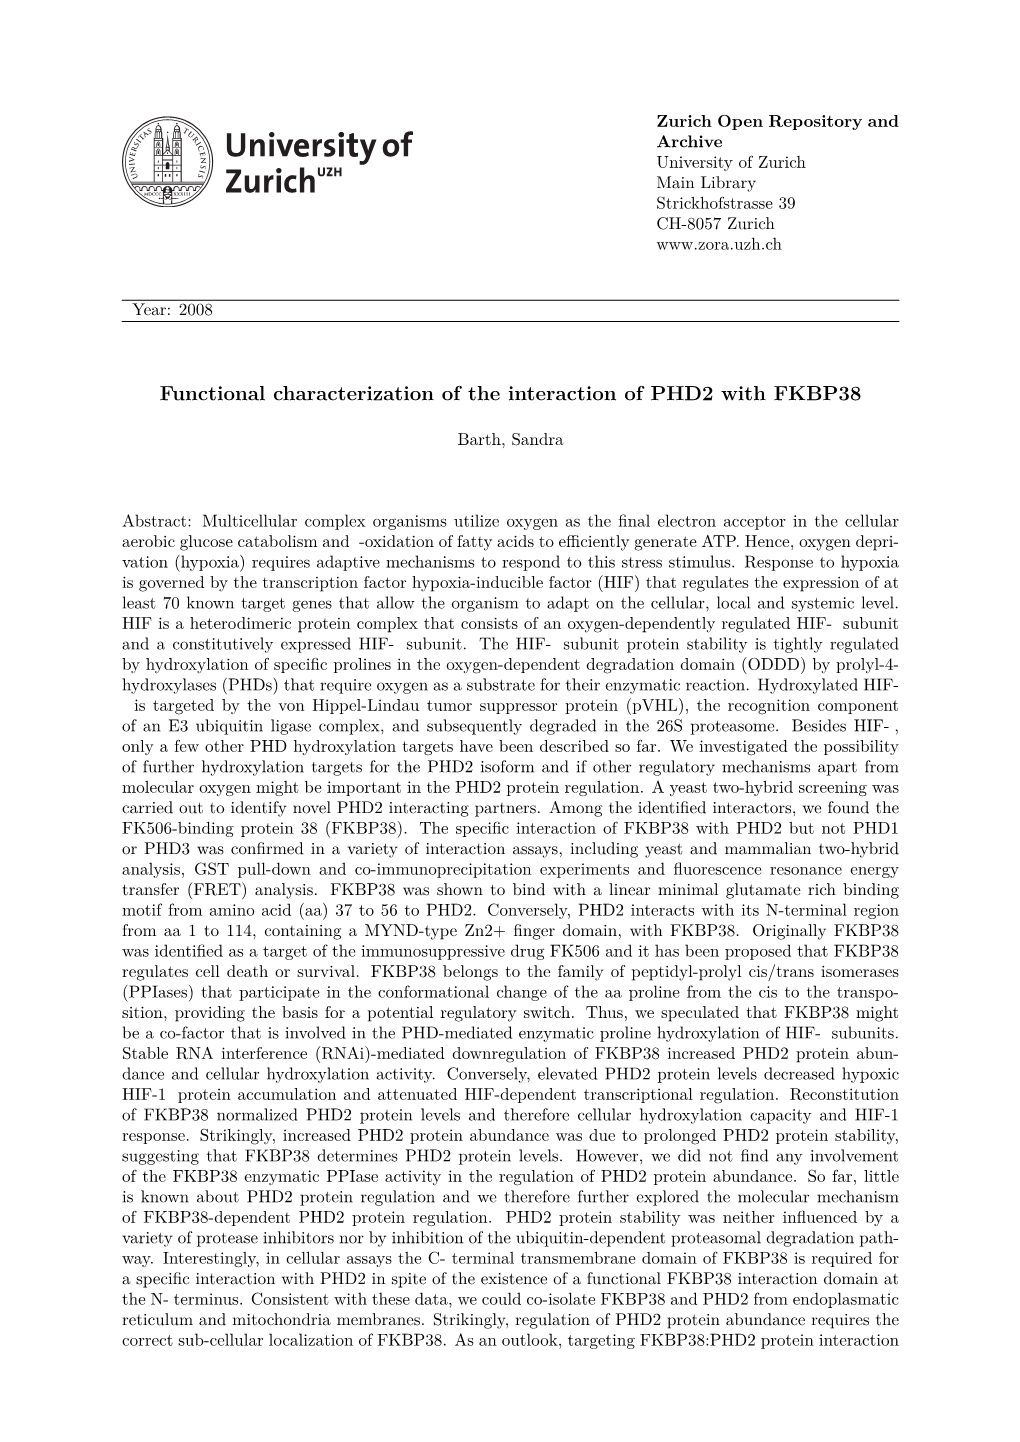 Functional Characterization of the Interaction of PHD2 with FKBP38